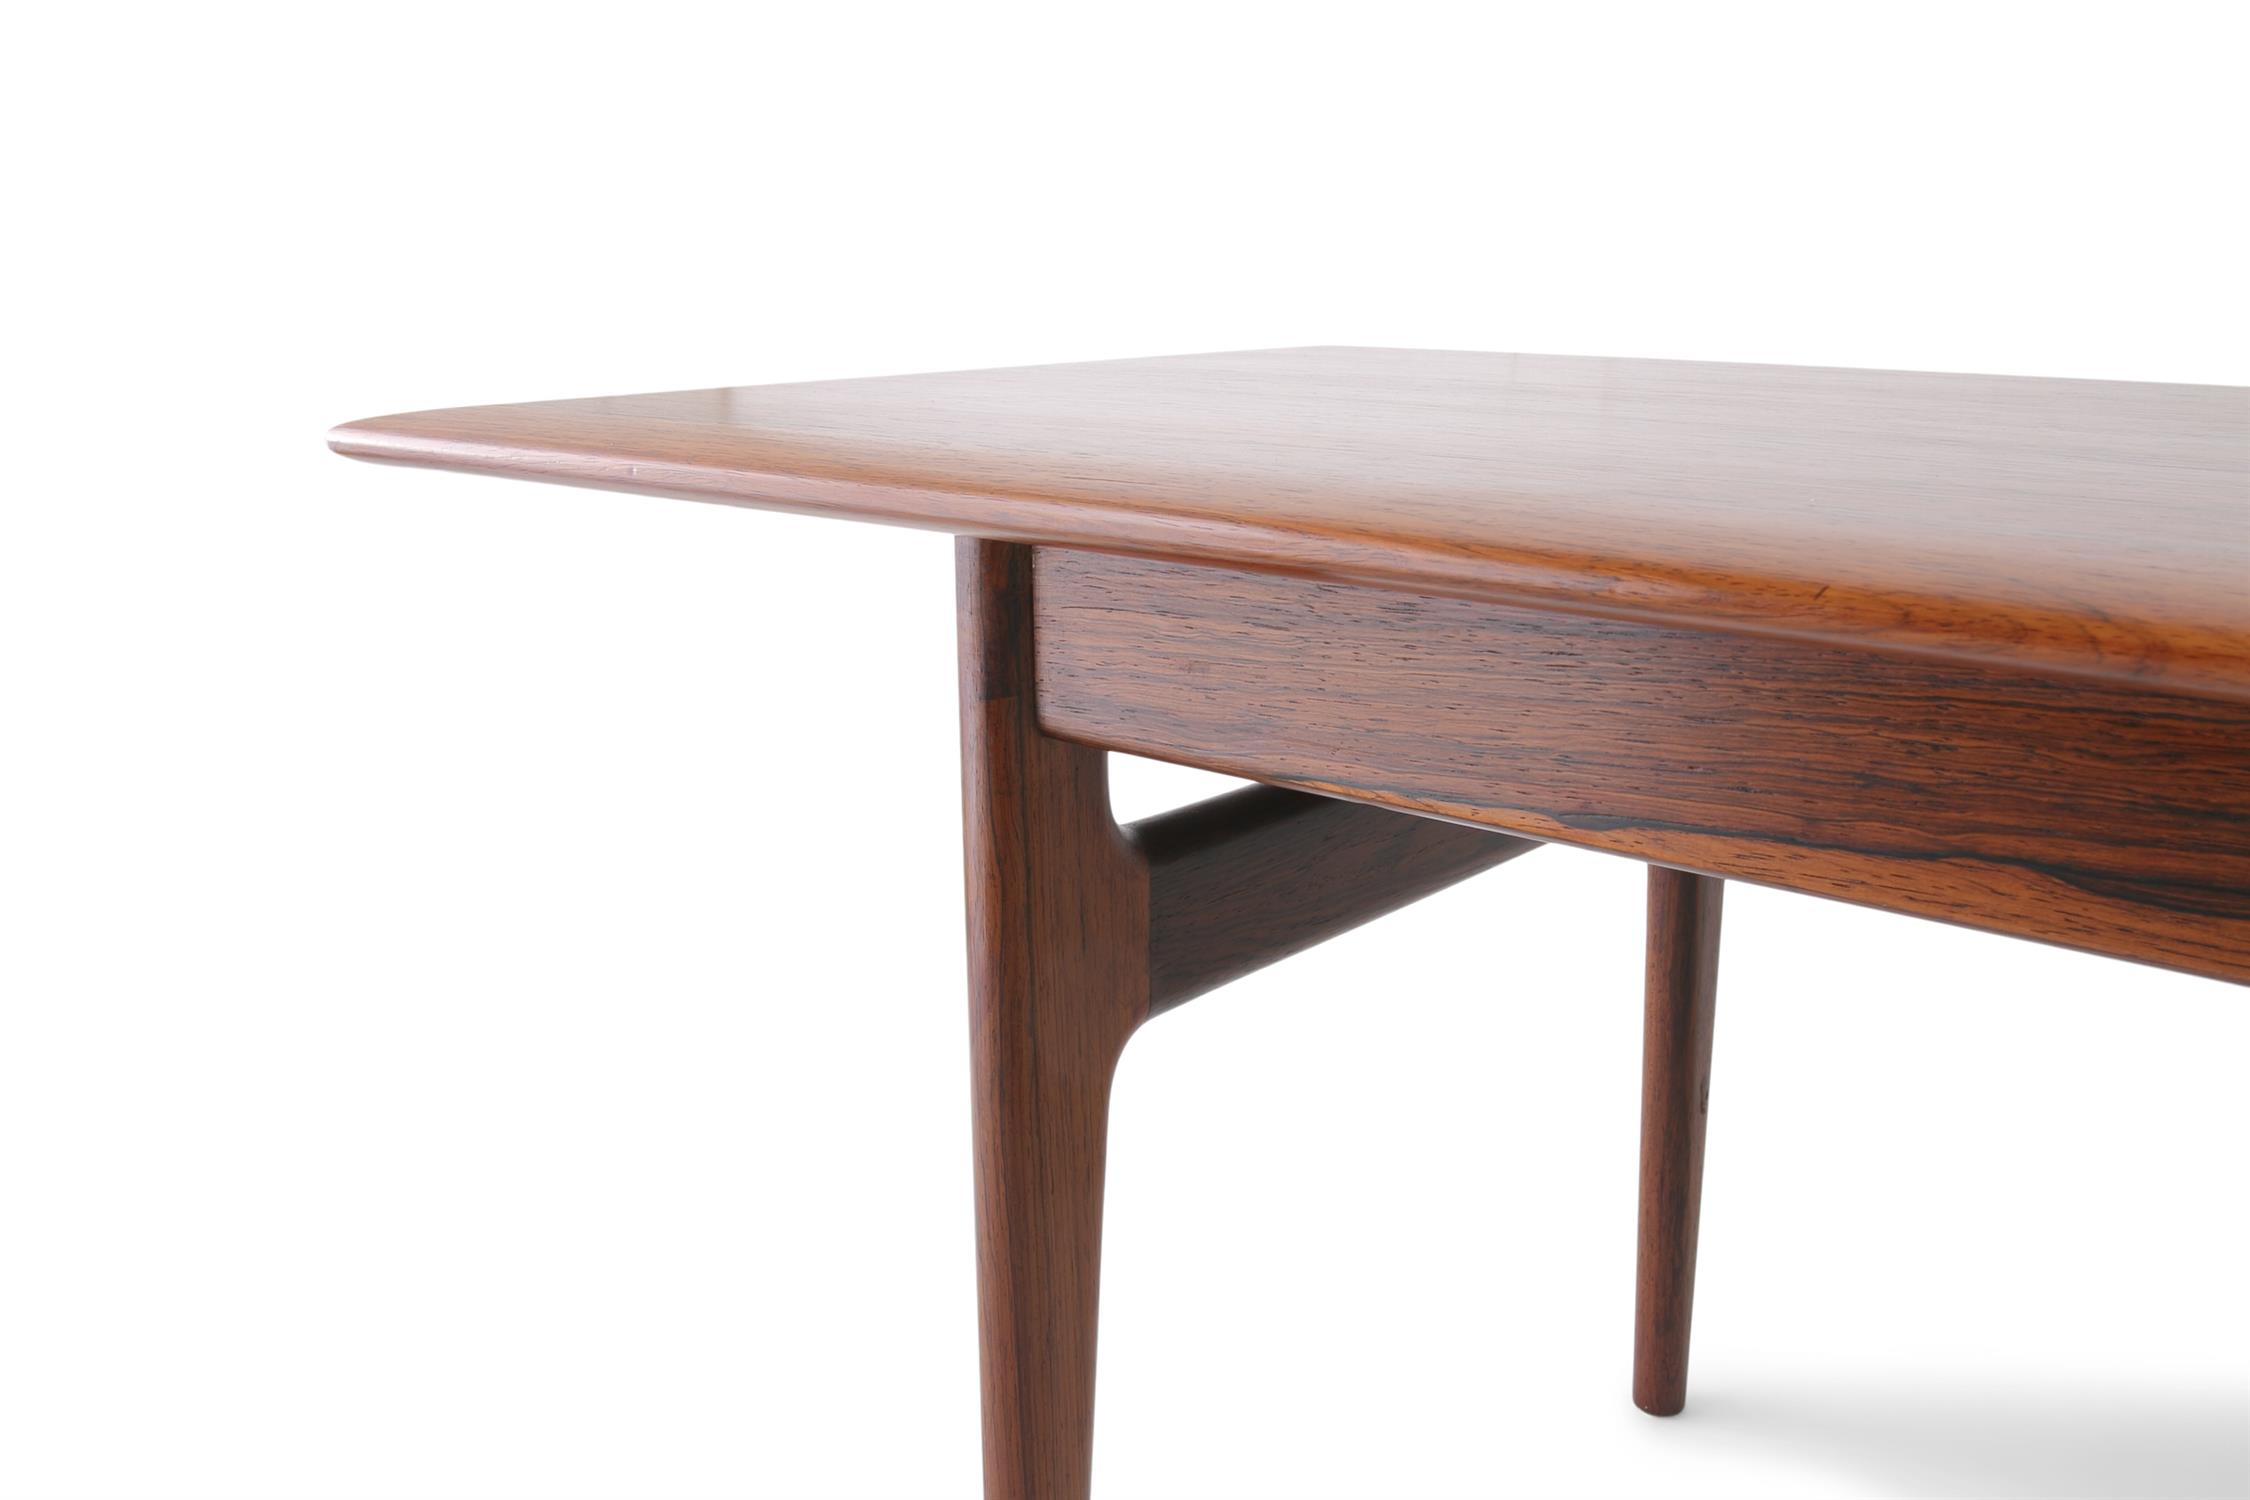 JOHANNES ANDERSEN A rosewood coffee table by Johannes Andersen for CFC. Silkeborg, Denmark, c.1960. - Image 6 of 7